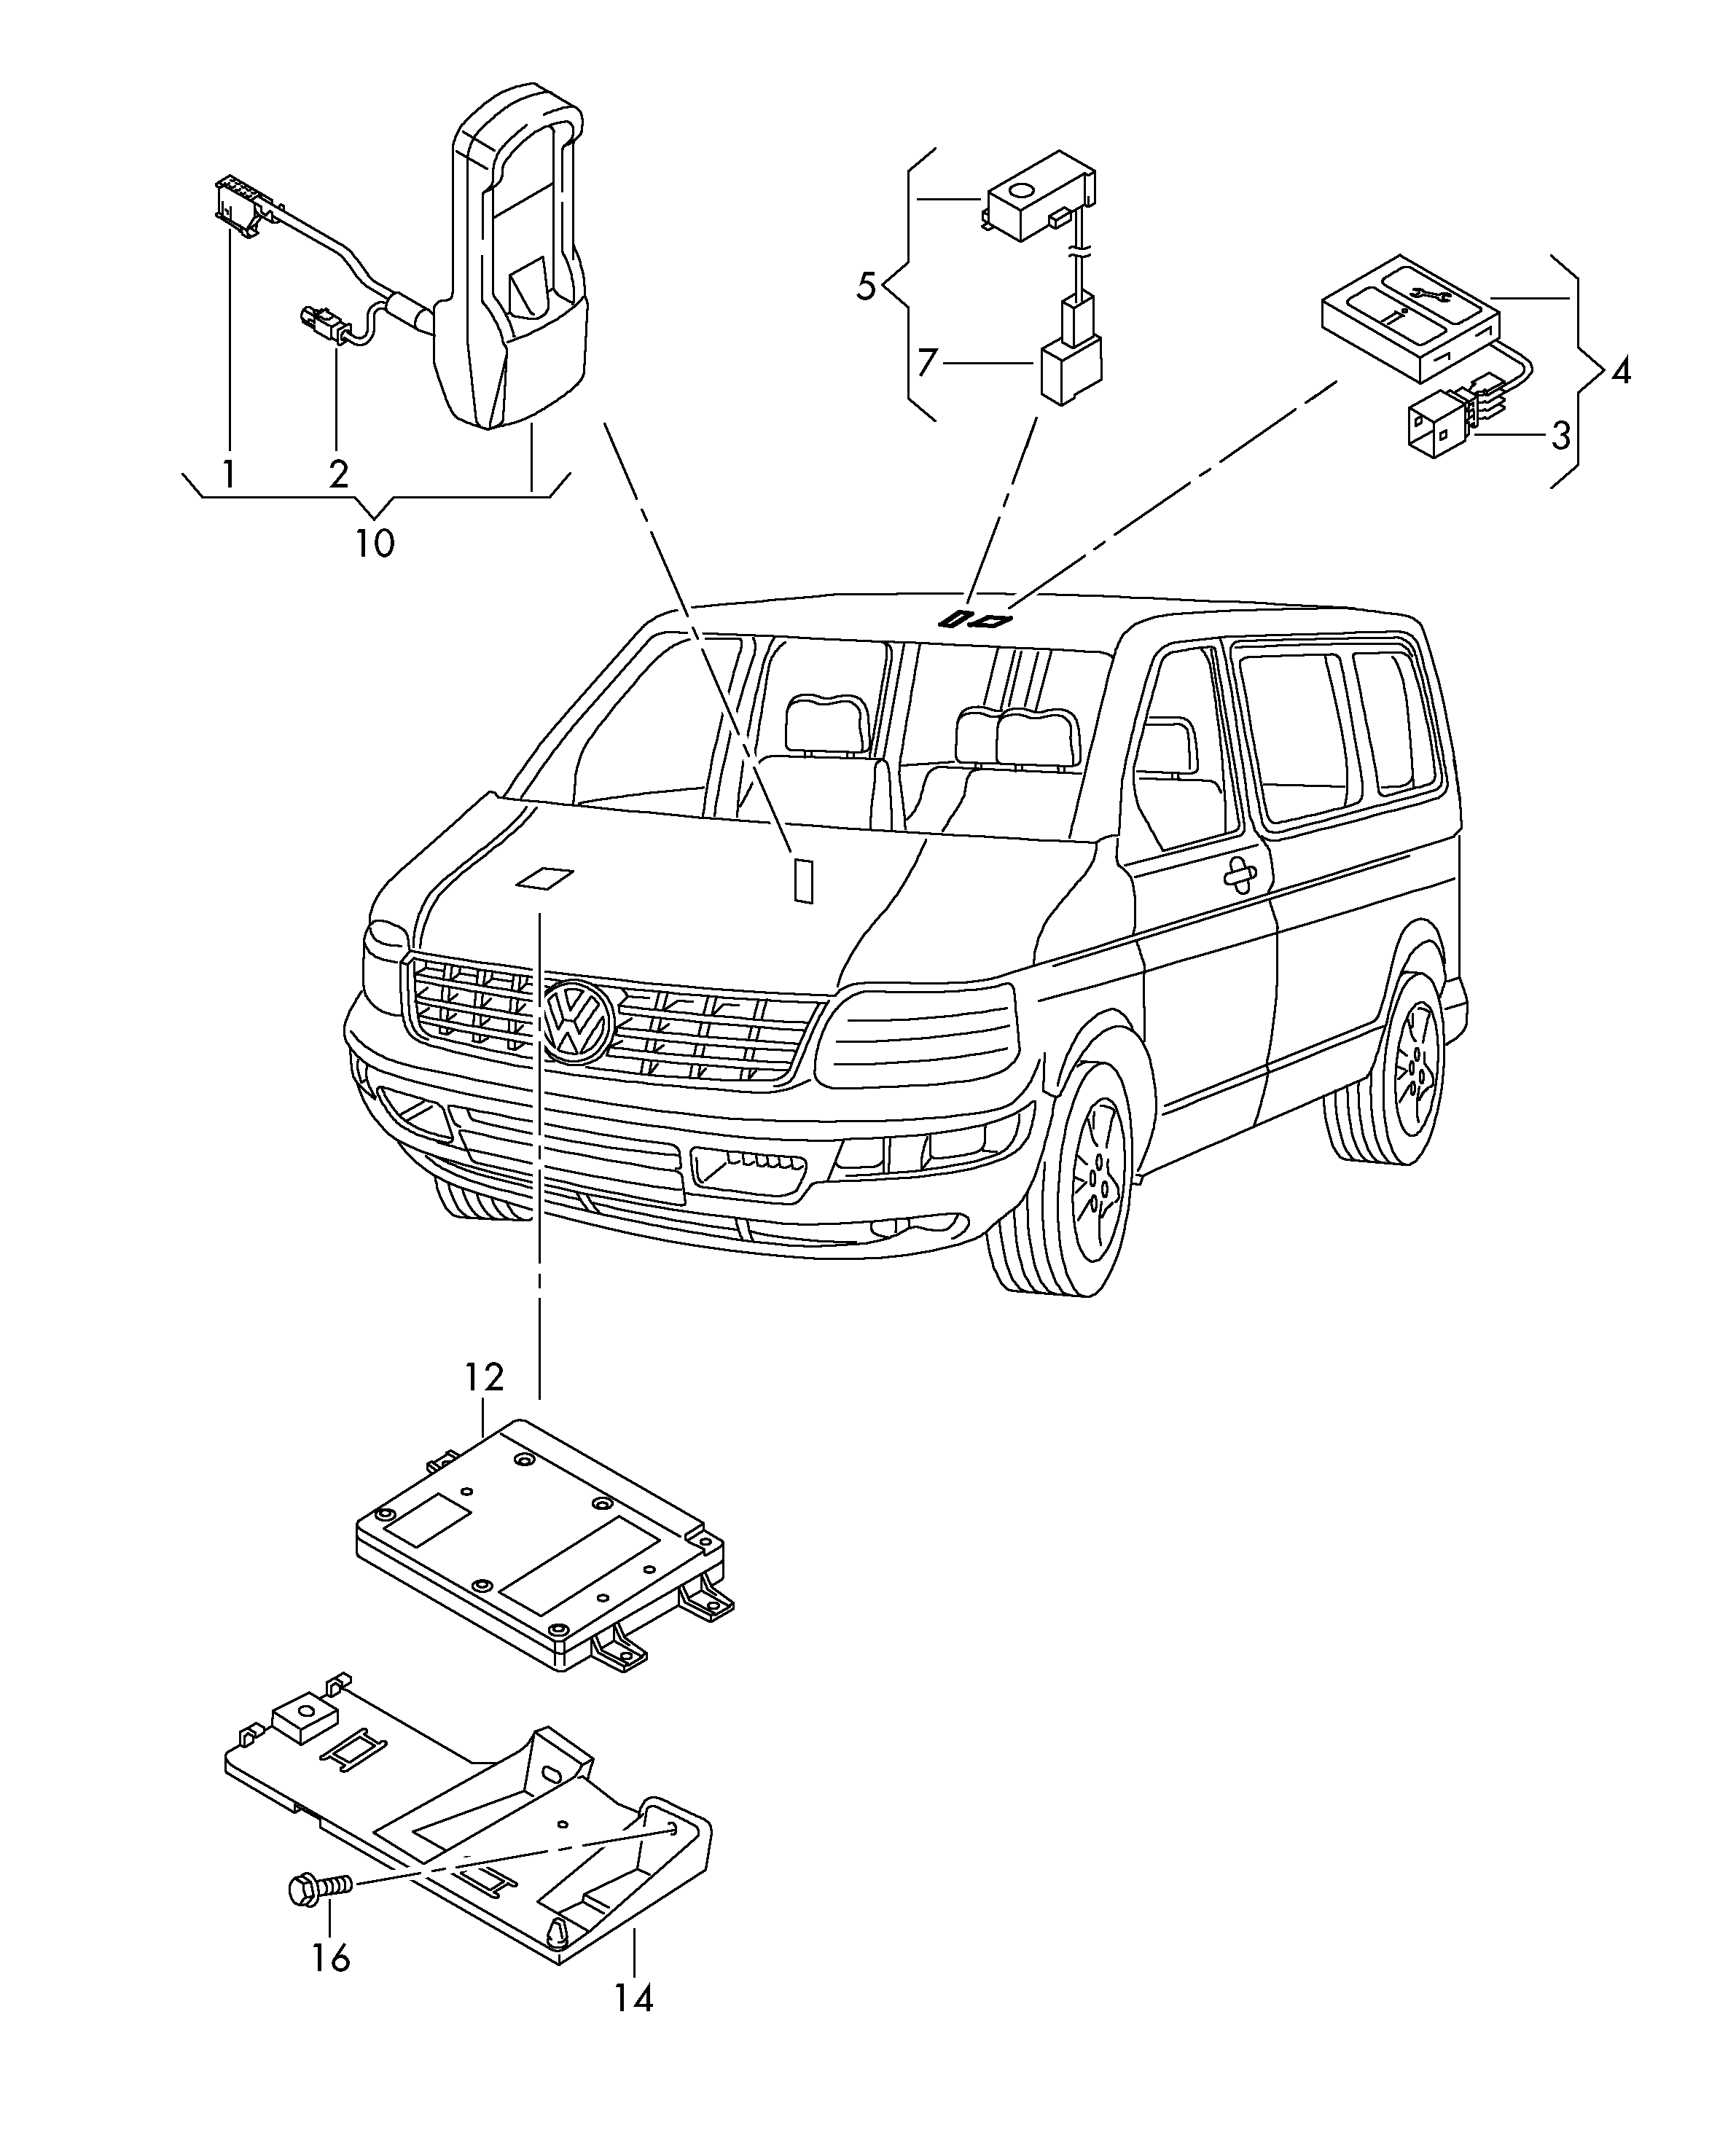 electrical parts for<br>preparation for telephone  - Transporter - tr